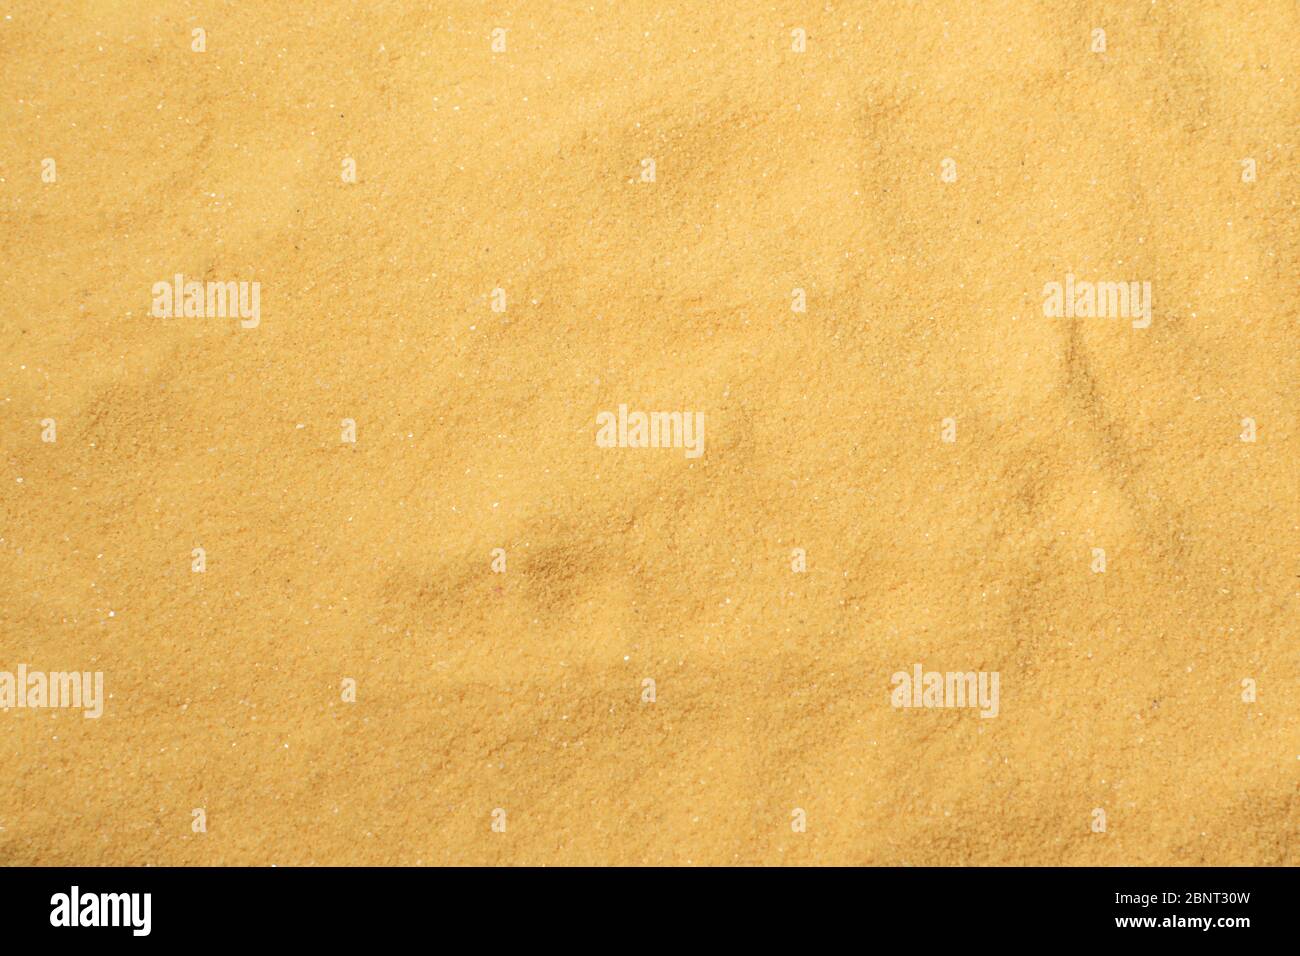 Sand beach texture and background. Stock Photo